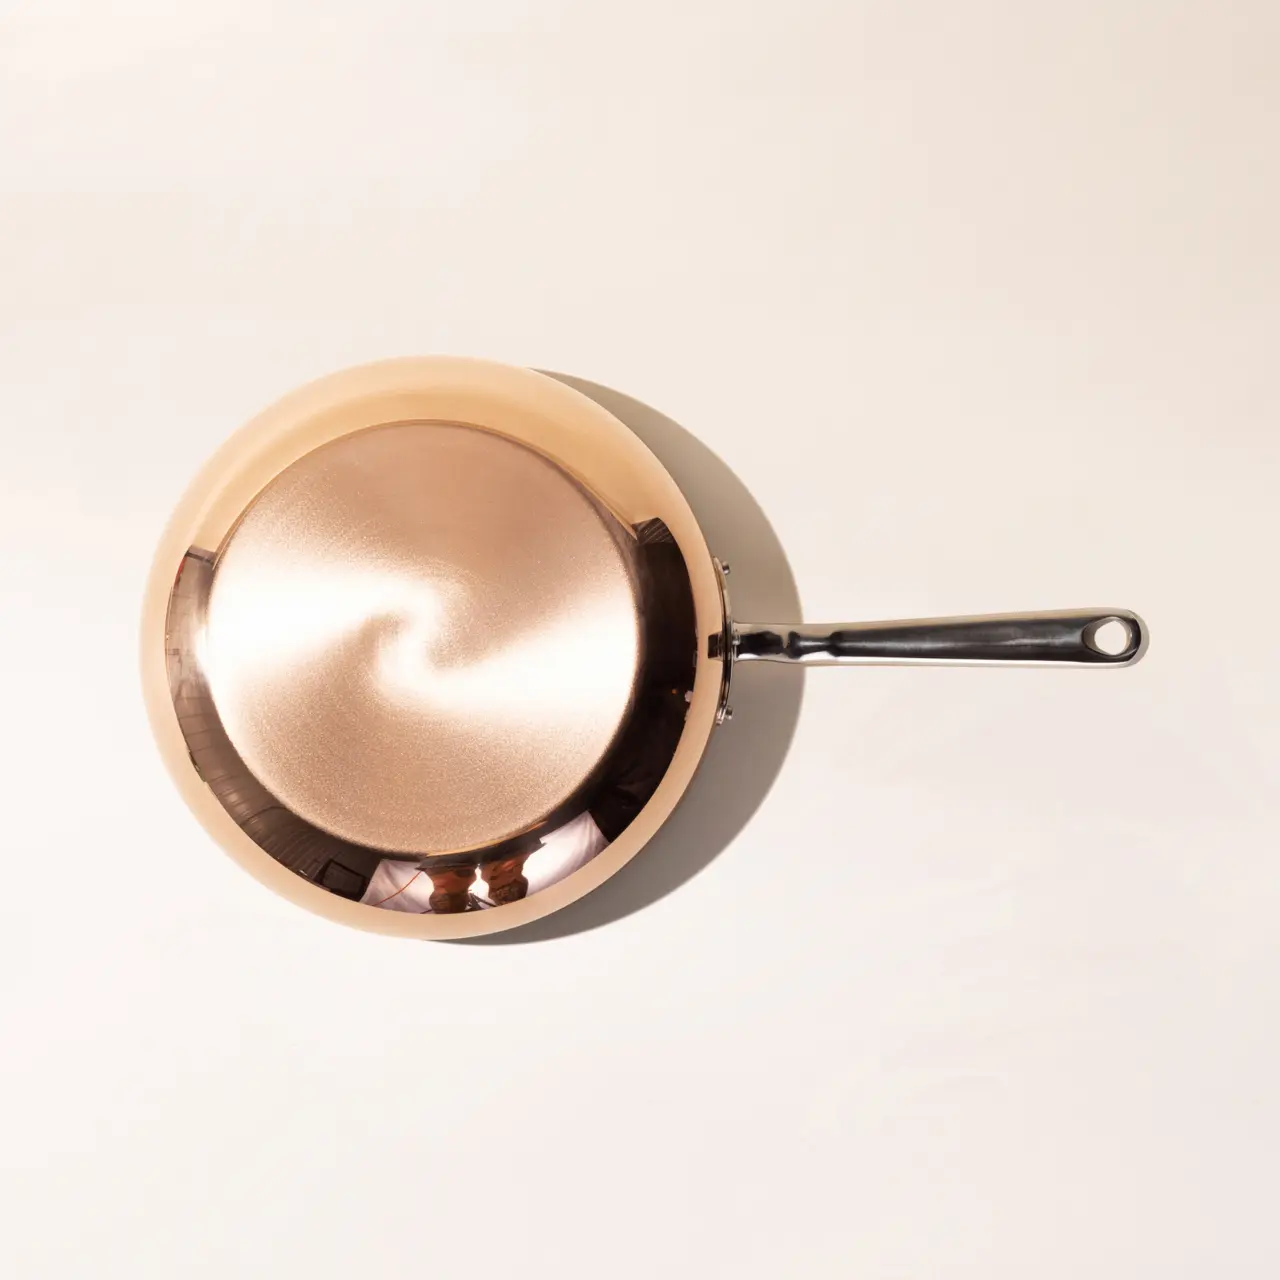 A copper-colored frying pan with a black handle is positioned on a light surface, viewed from above.